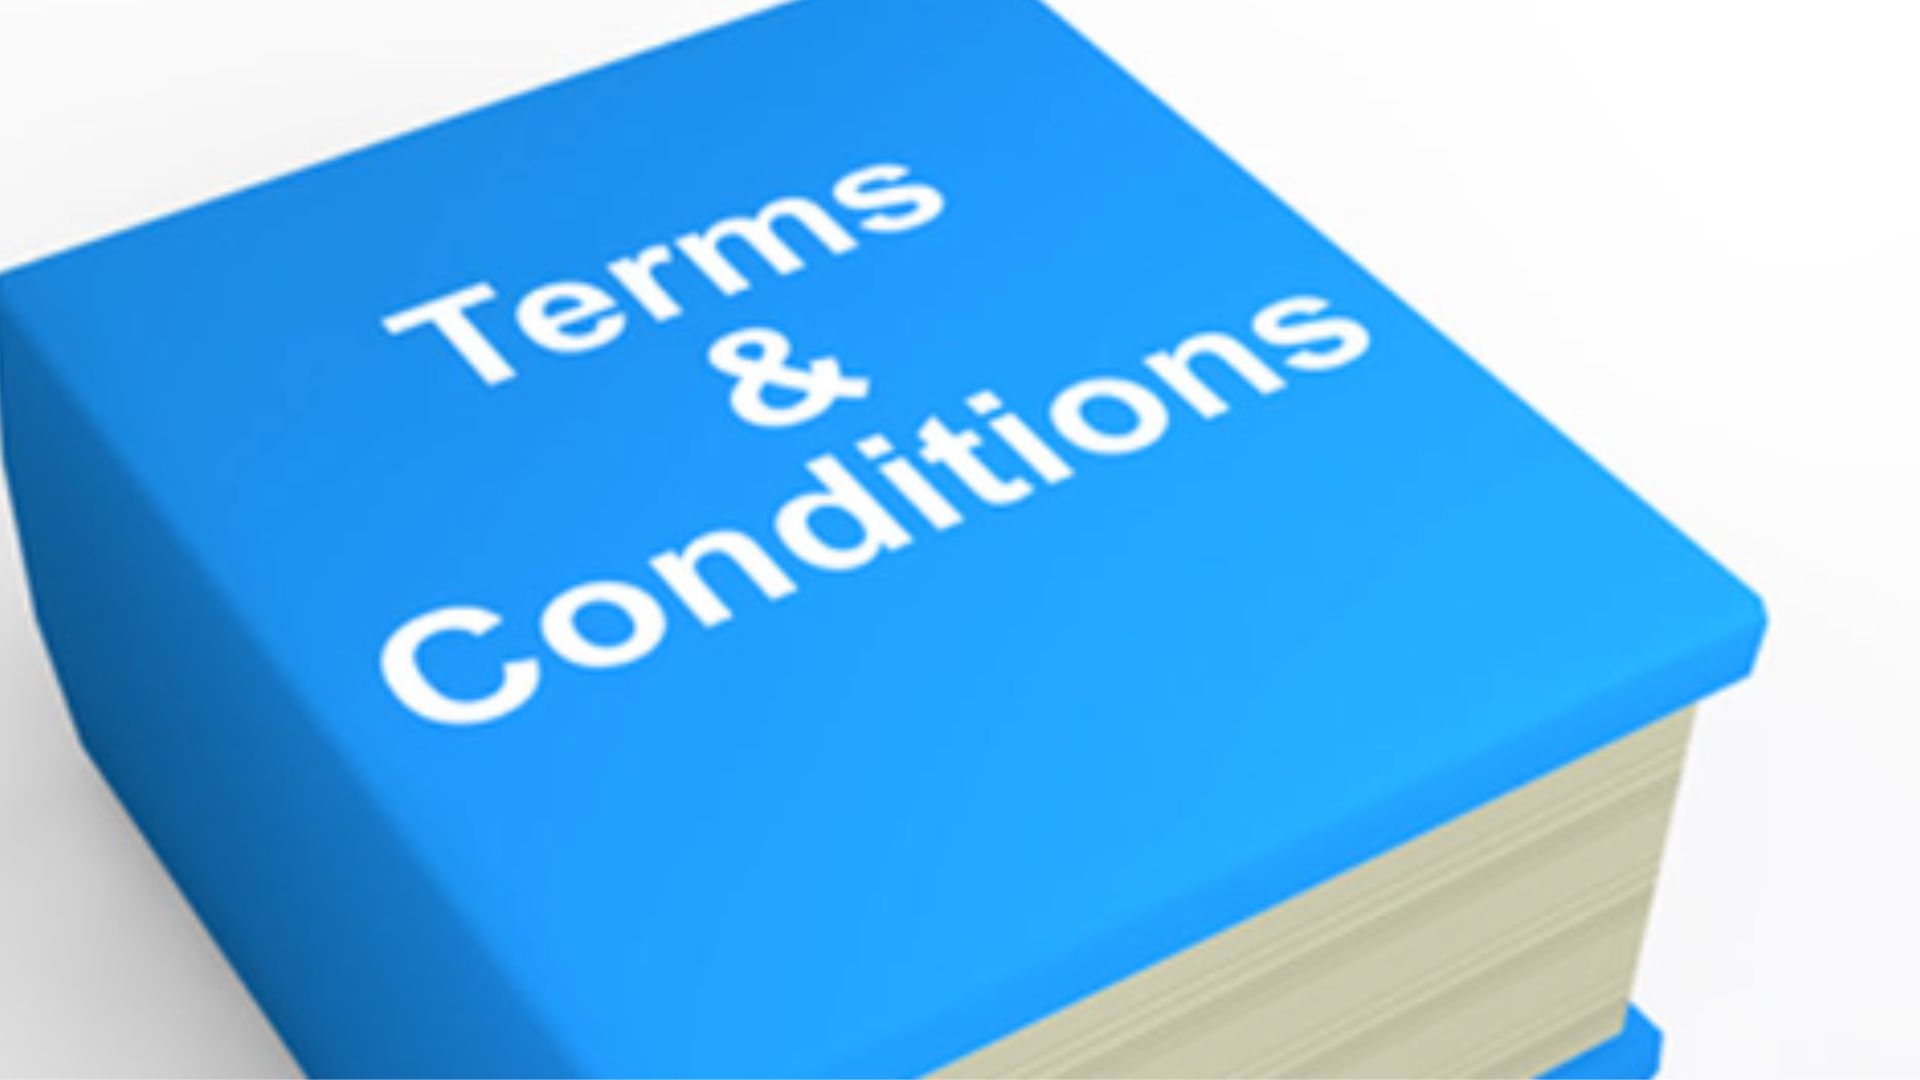 A picture about Terms and Conditions.